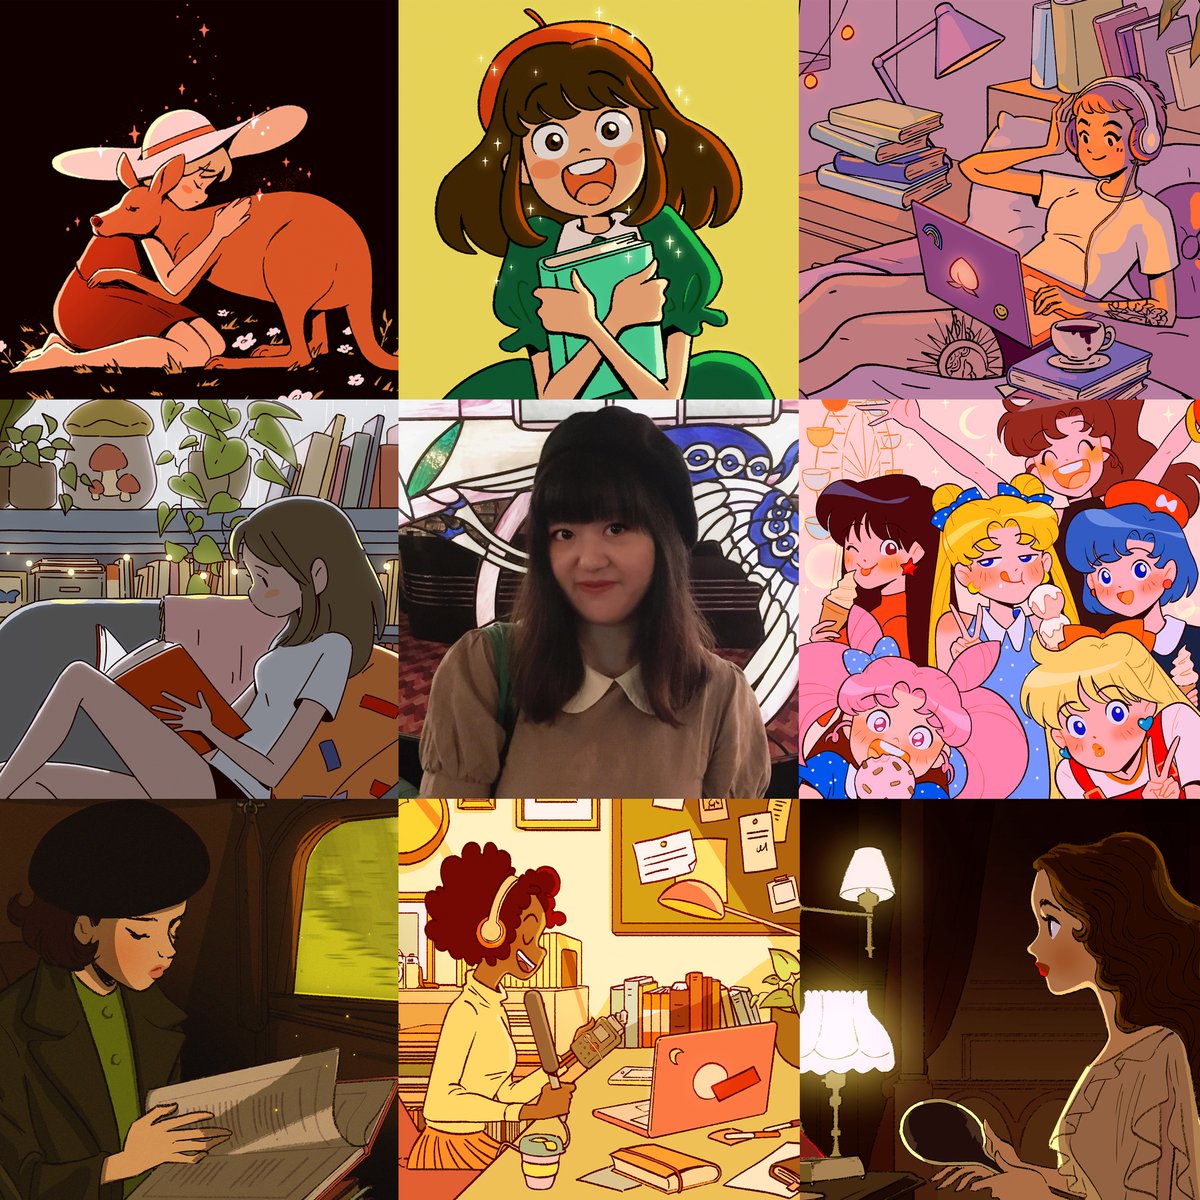 Pretty happy with my work this year ? #artvsartist2020 